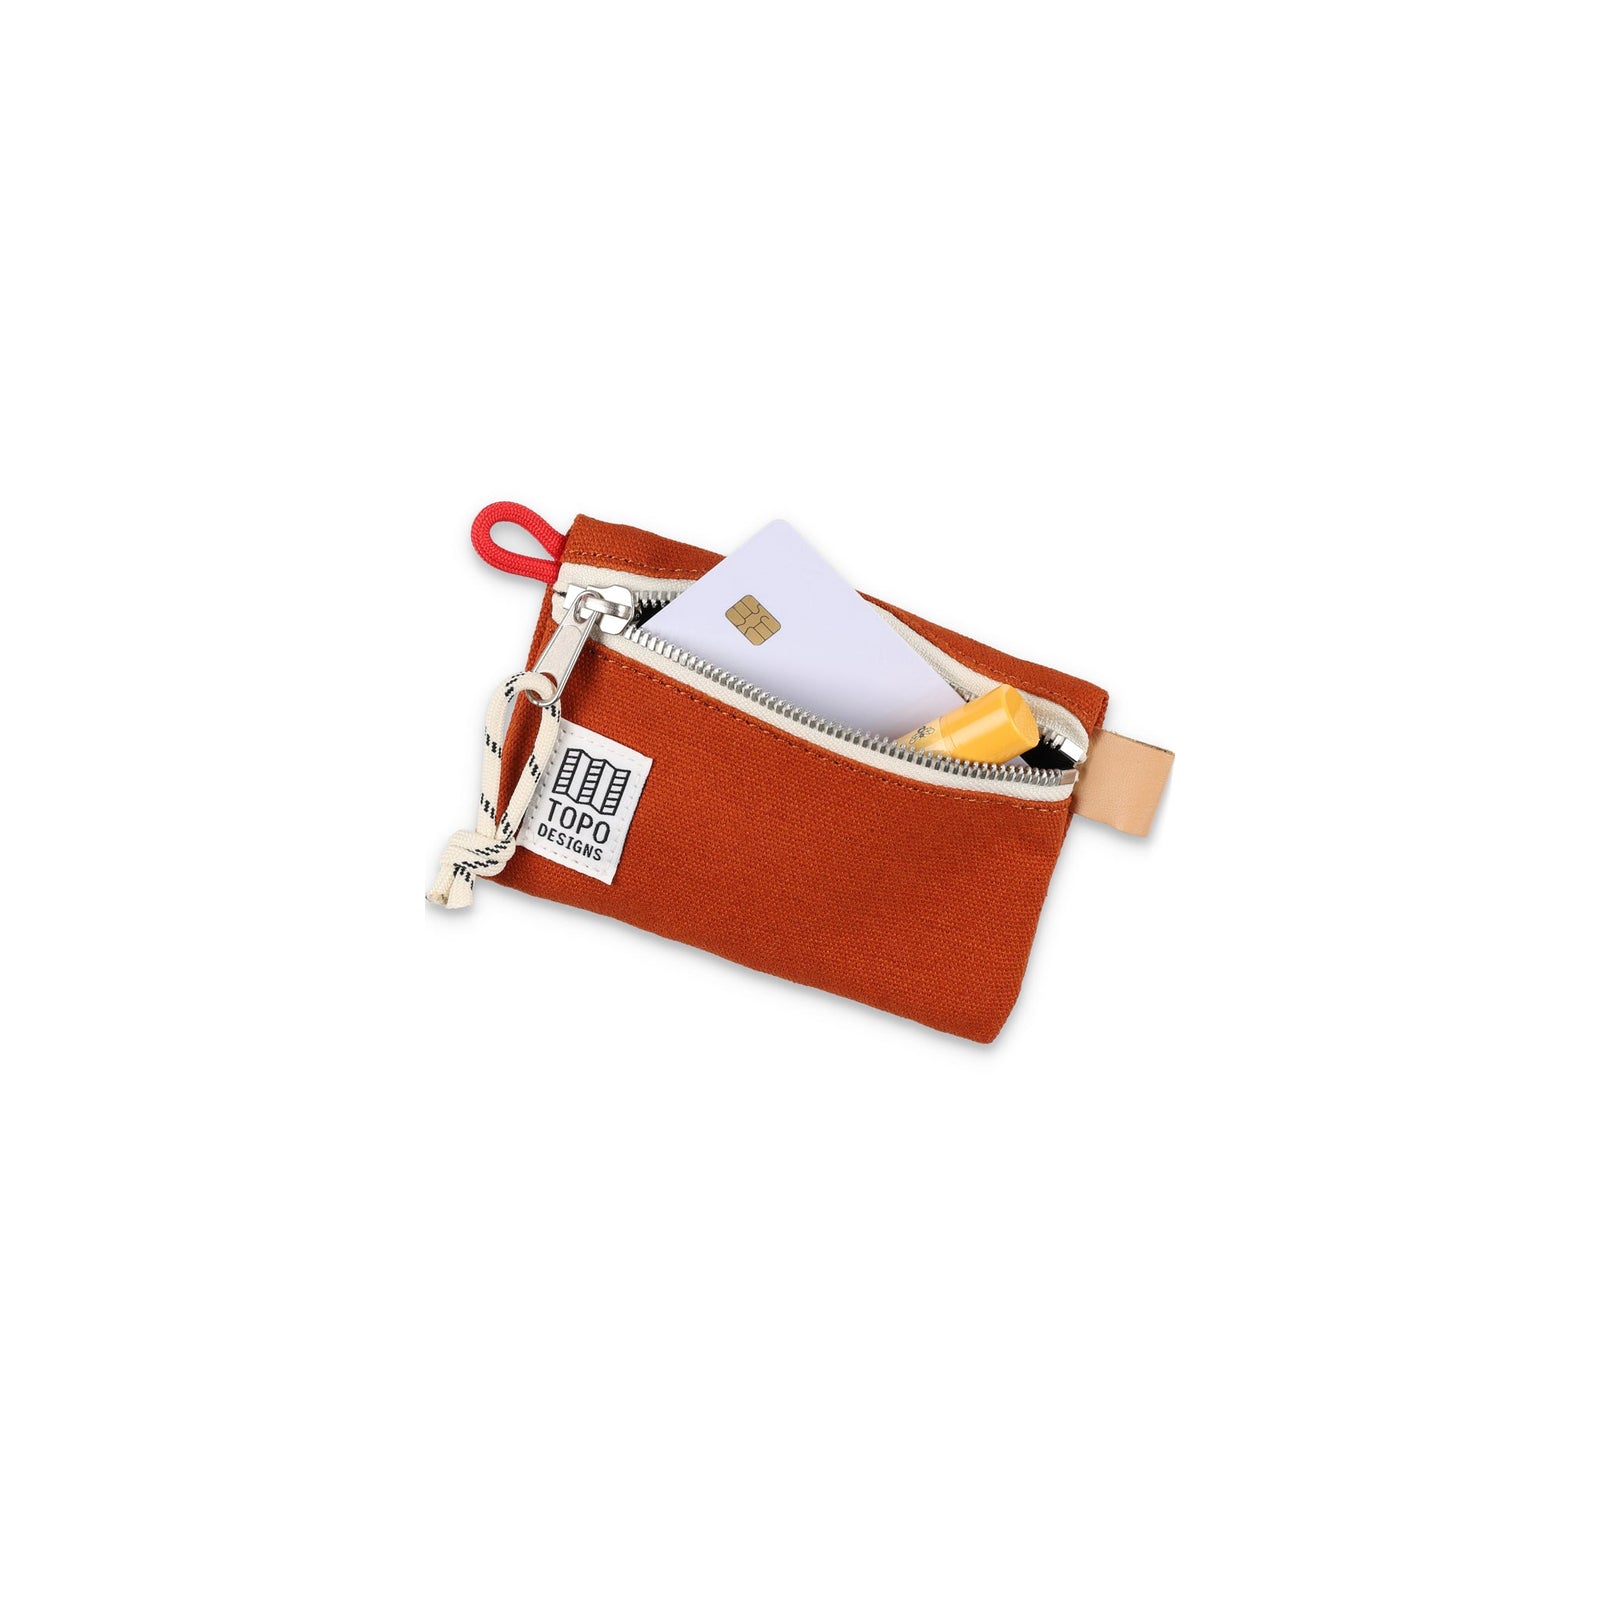 Topo Designs Accessory Bag "Micro" in "Clay" orange canvas with credit card and lip balm to show size.